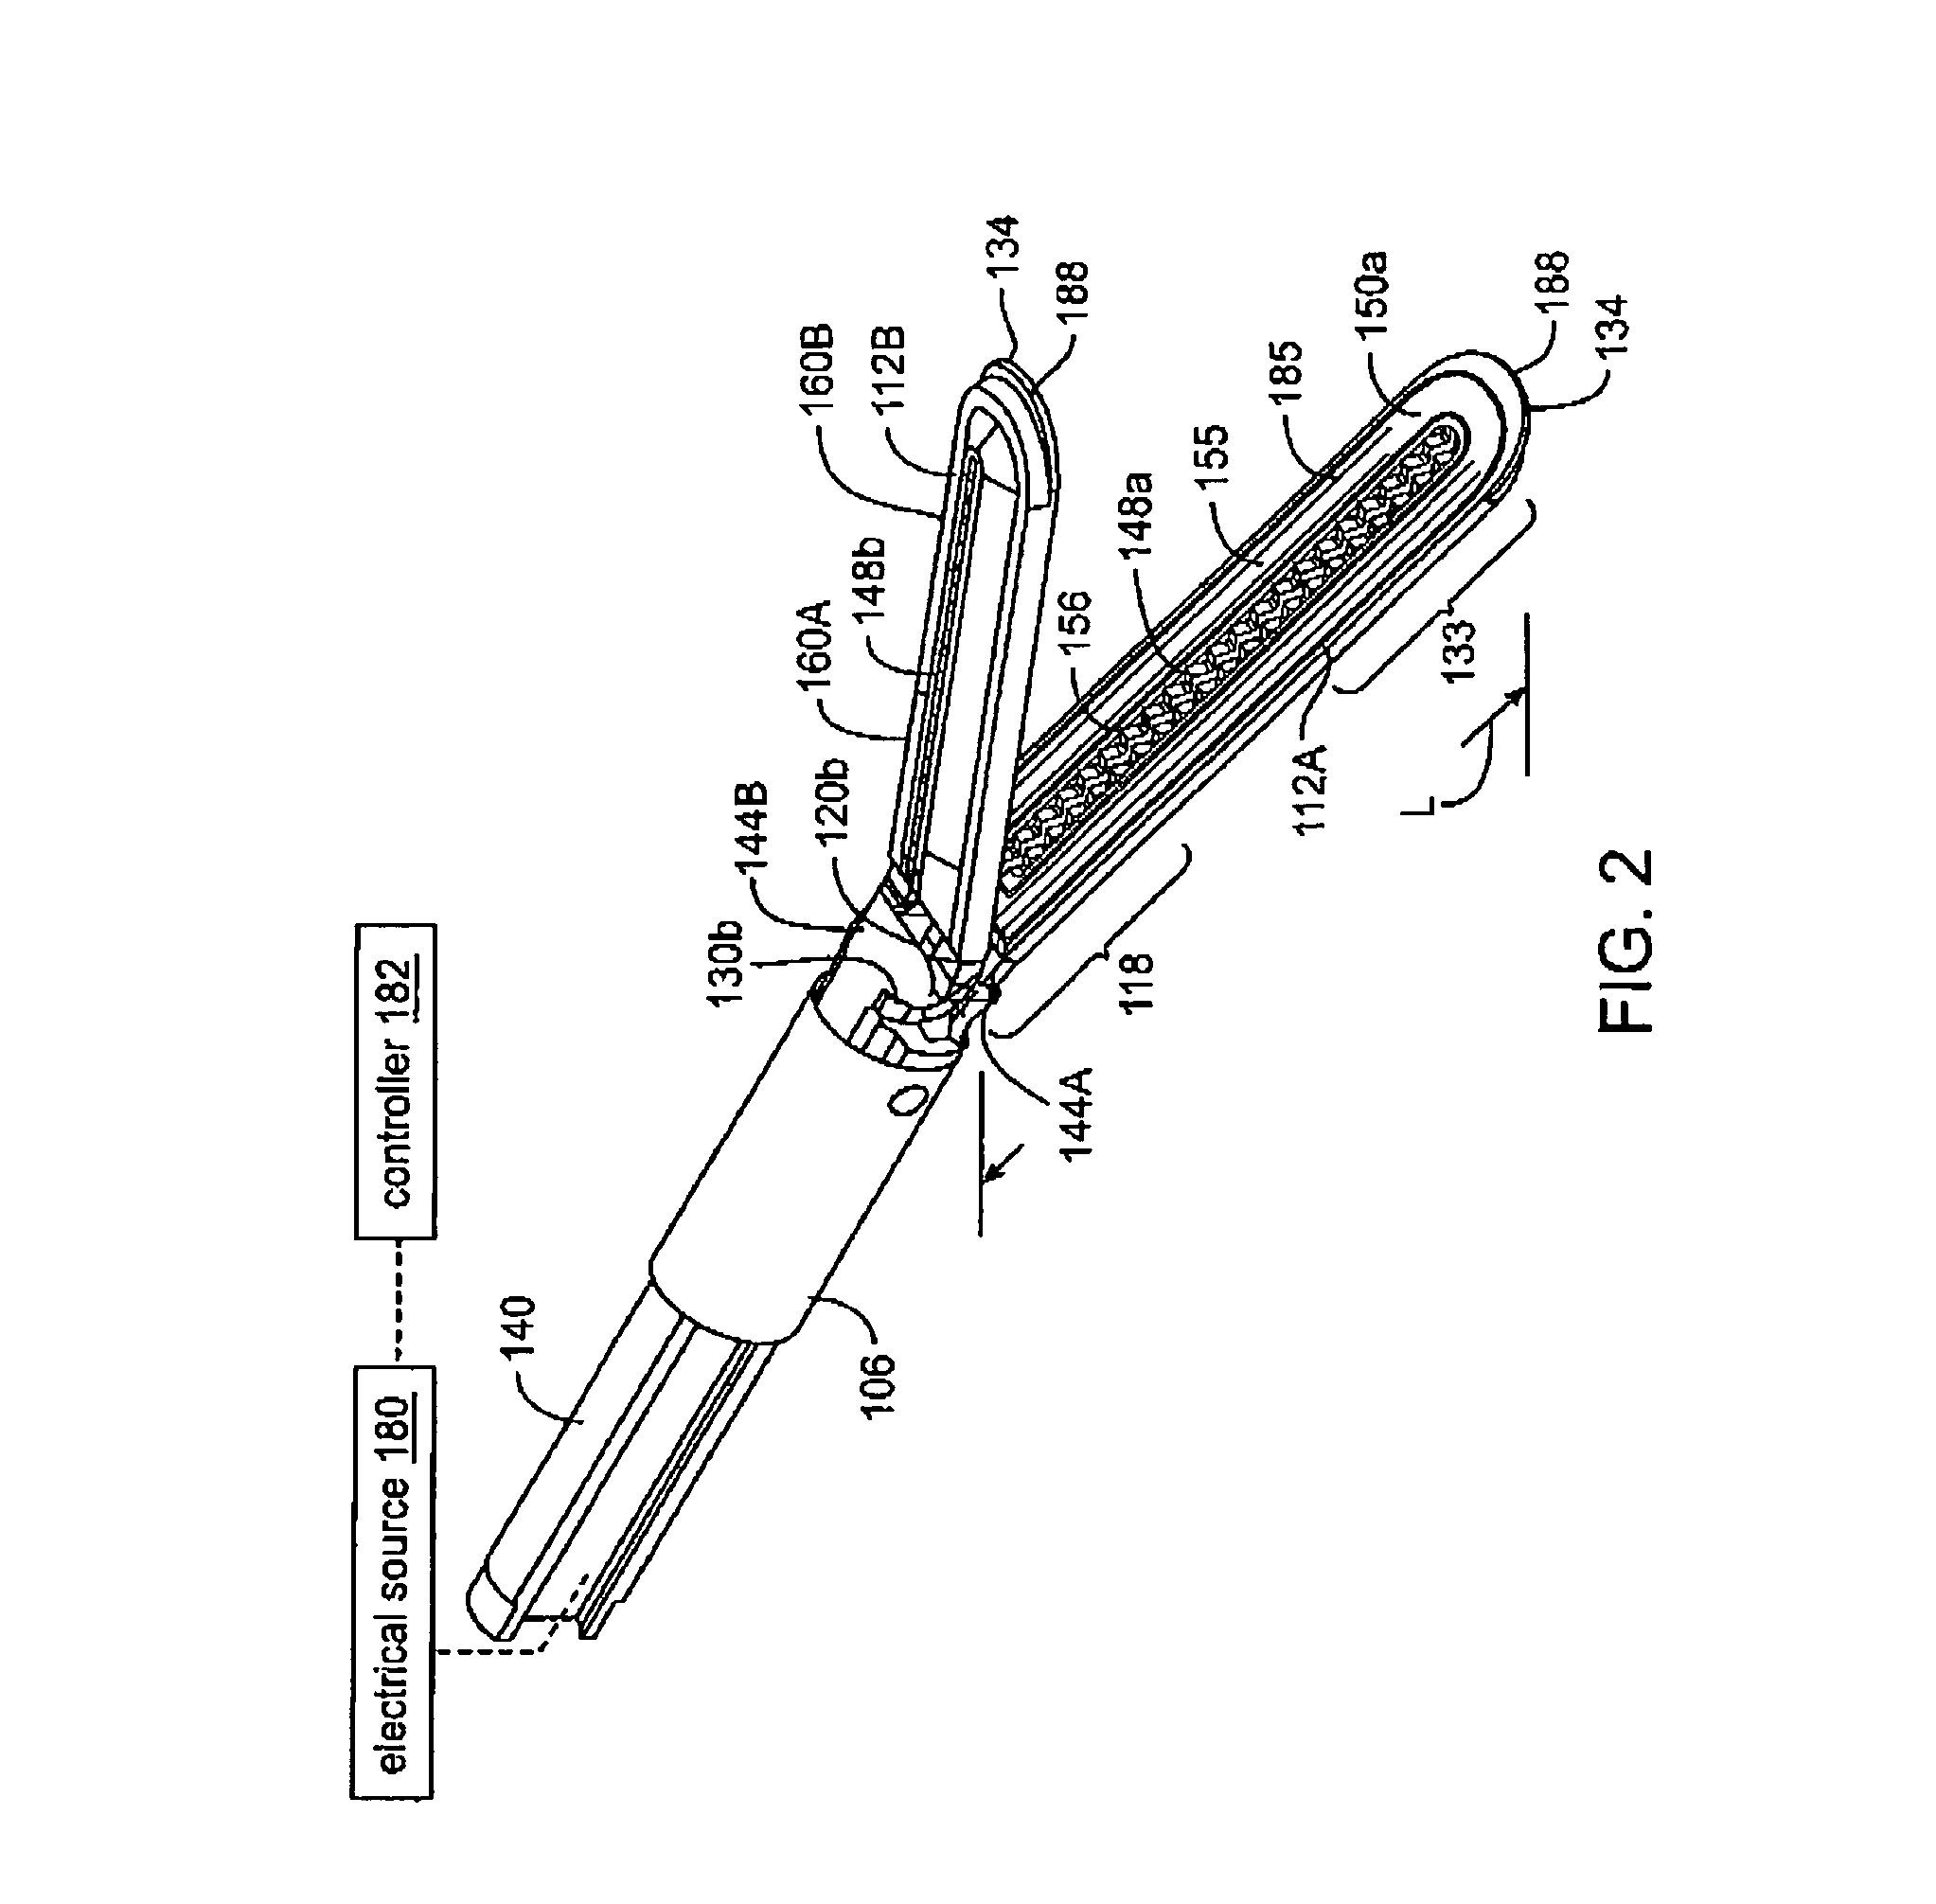 Jaw structure for electrosurgical instrument and method of use